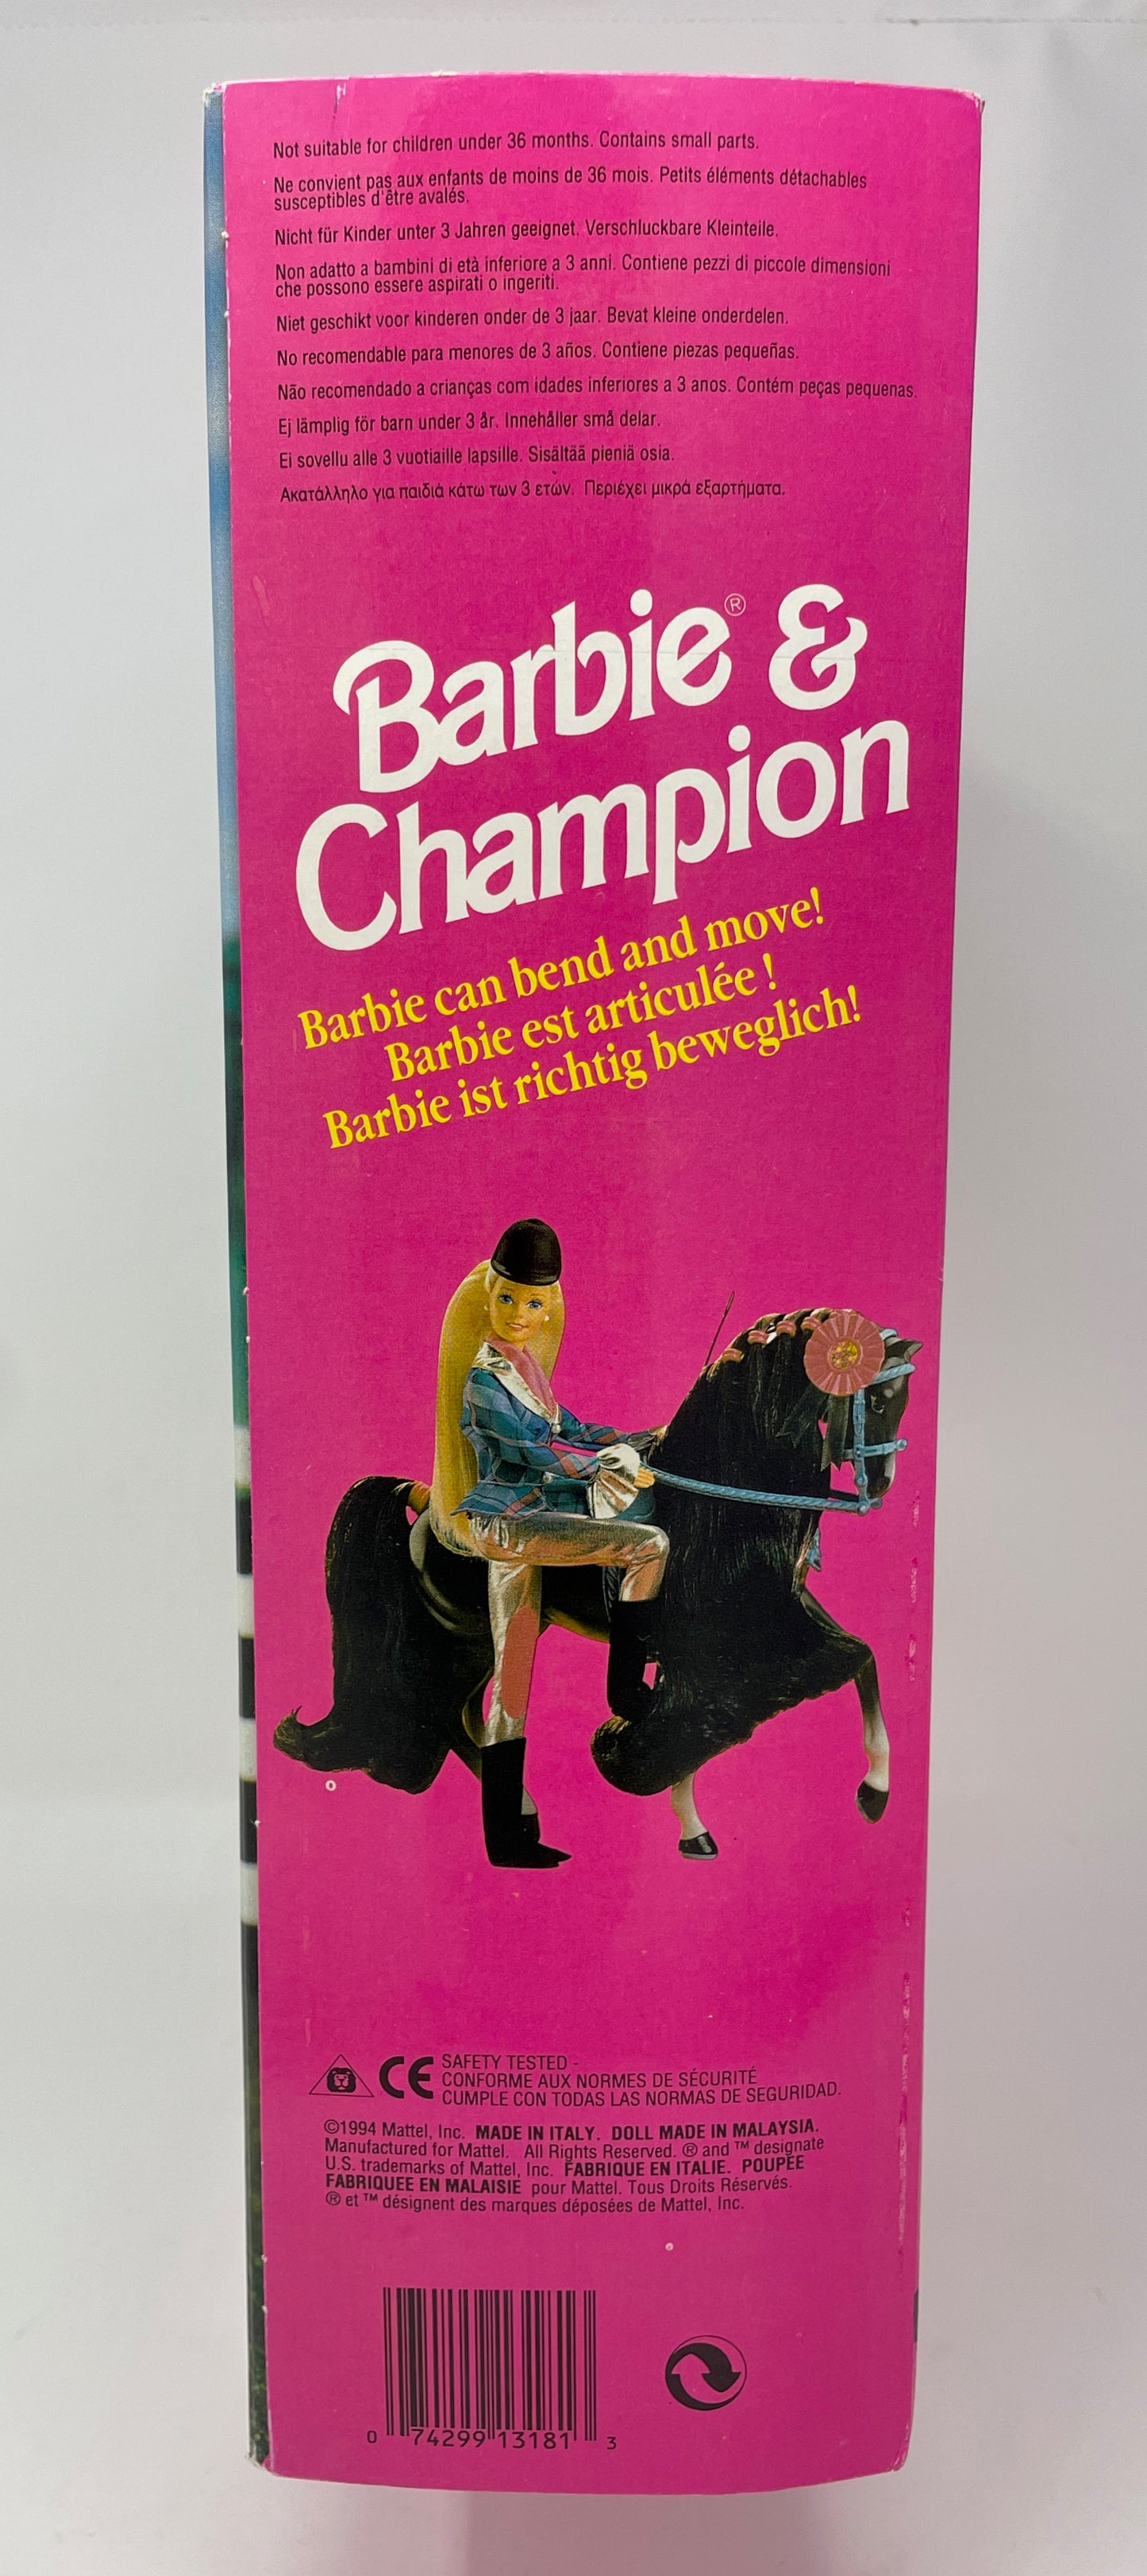 BARBIE & CHAMPION #13181 - MADE IN ITALY - MATTEL 1994